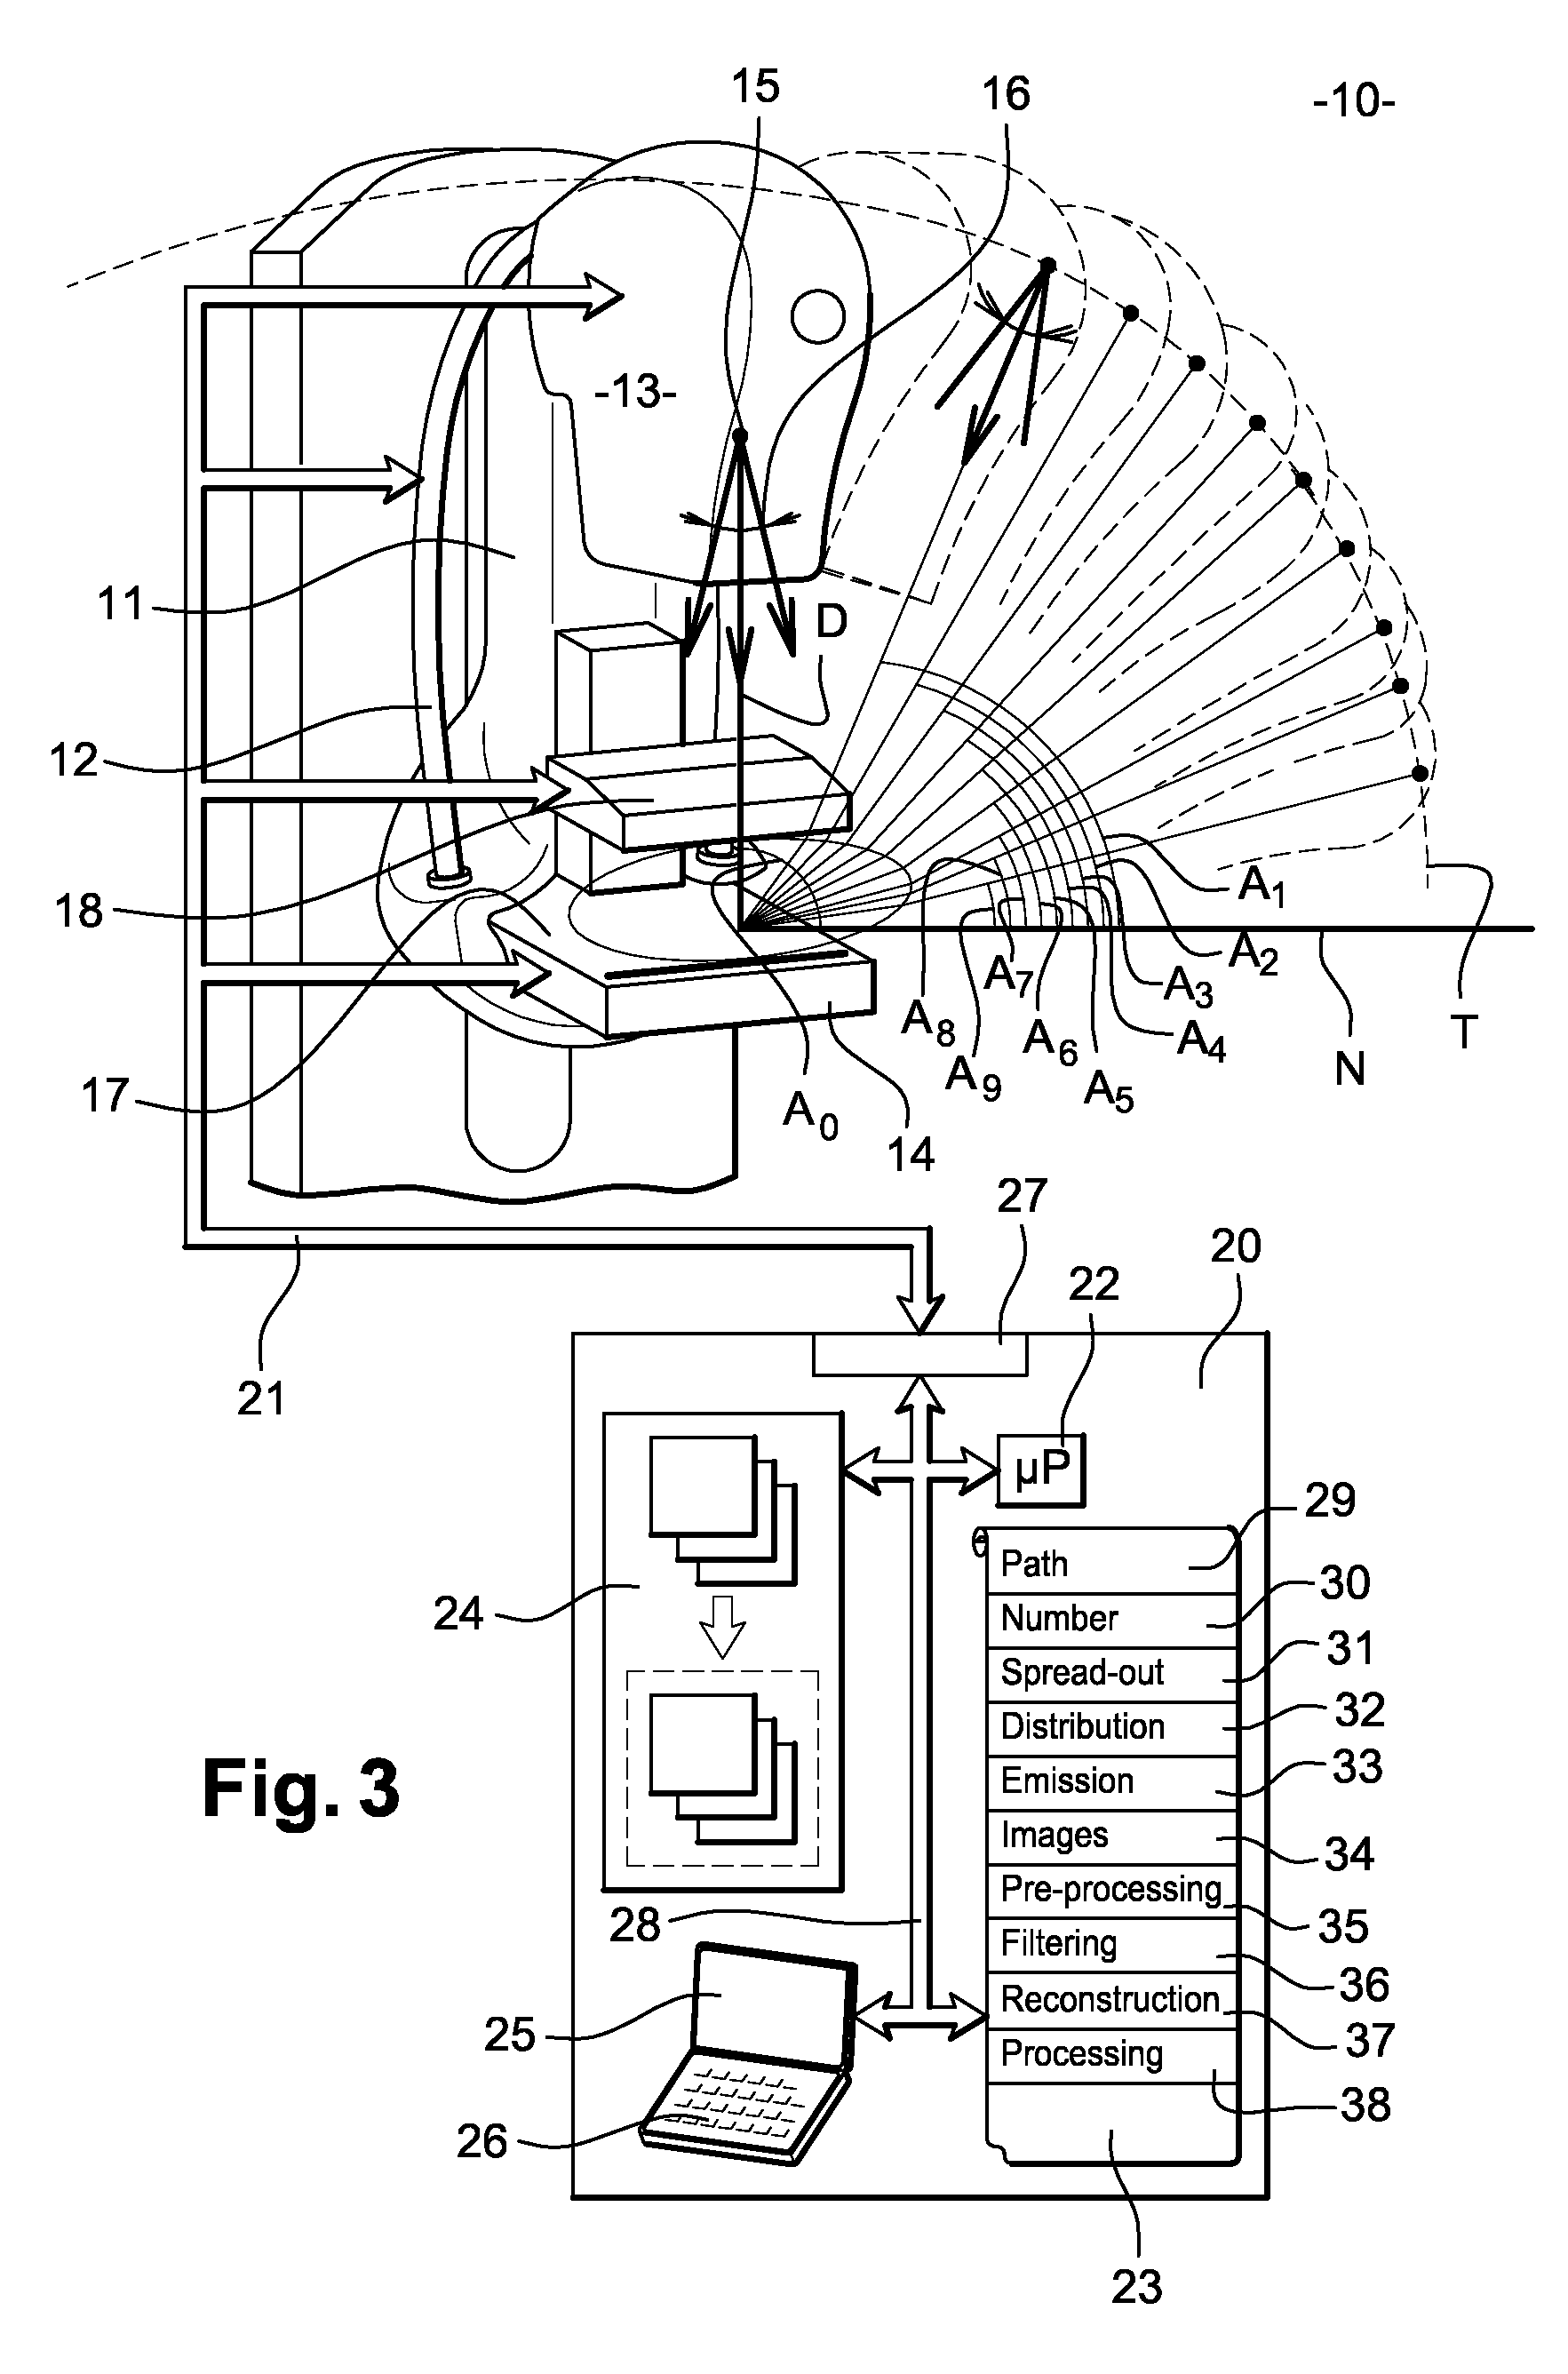 Method for obtaining a tomosynthesis image